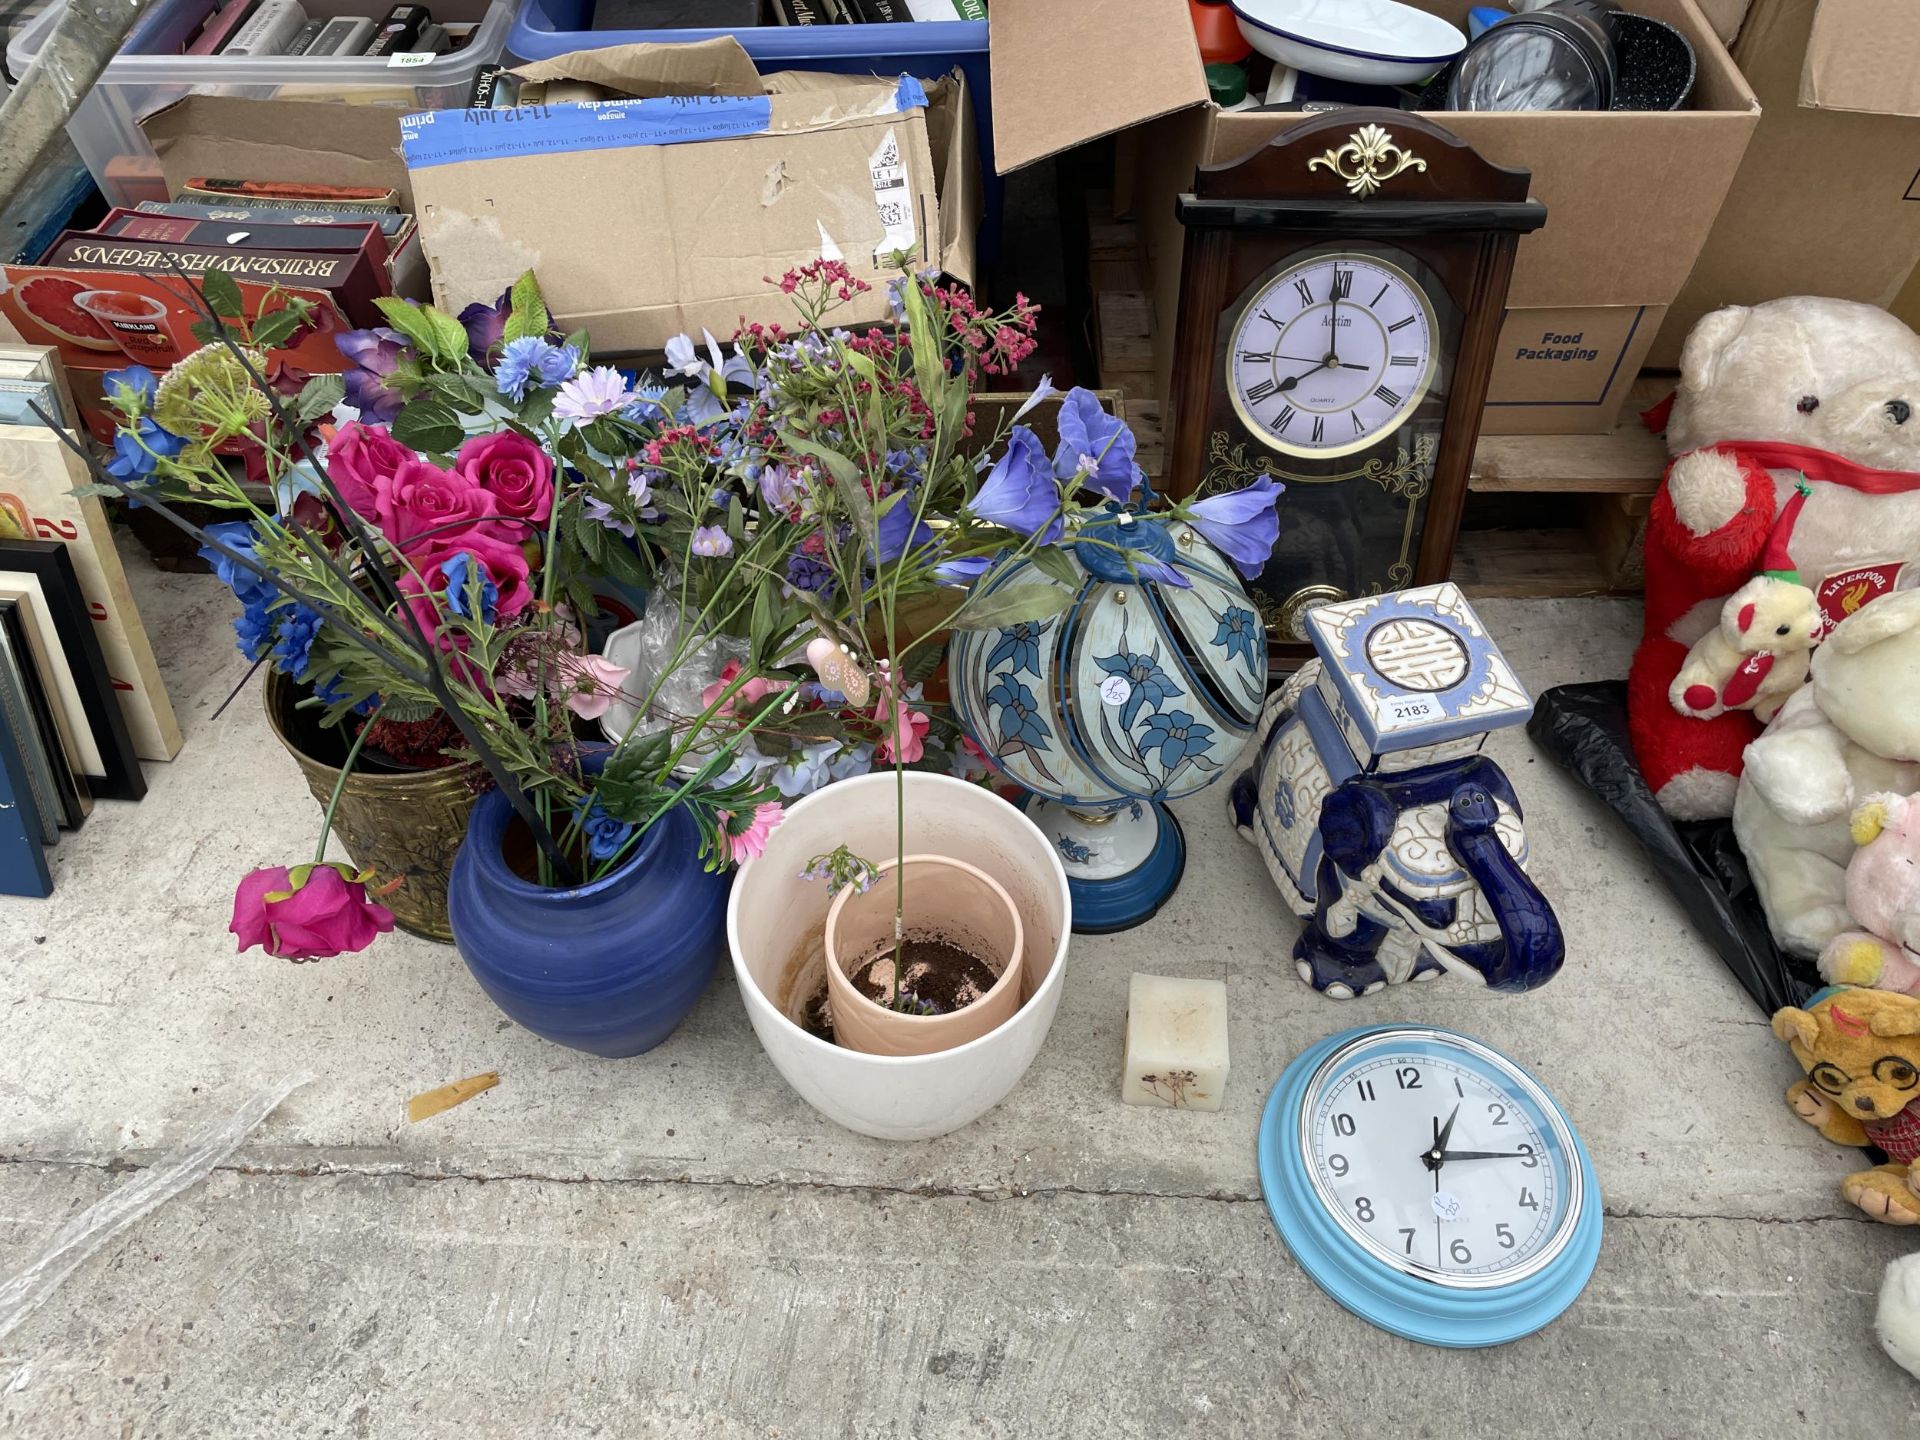 AN ASSORTMENT OF ITEMS TO INCLUDE PLANT POTS, A CERAMIC ELEPHANT AND A CLOCK ETC